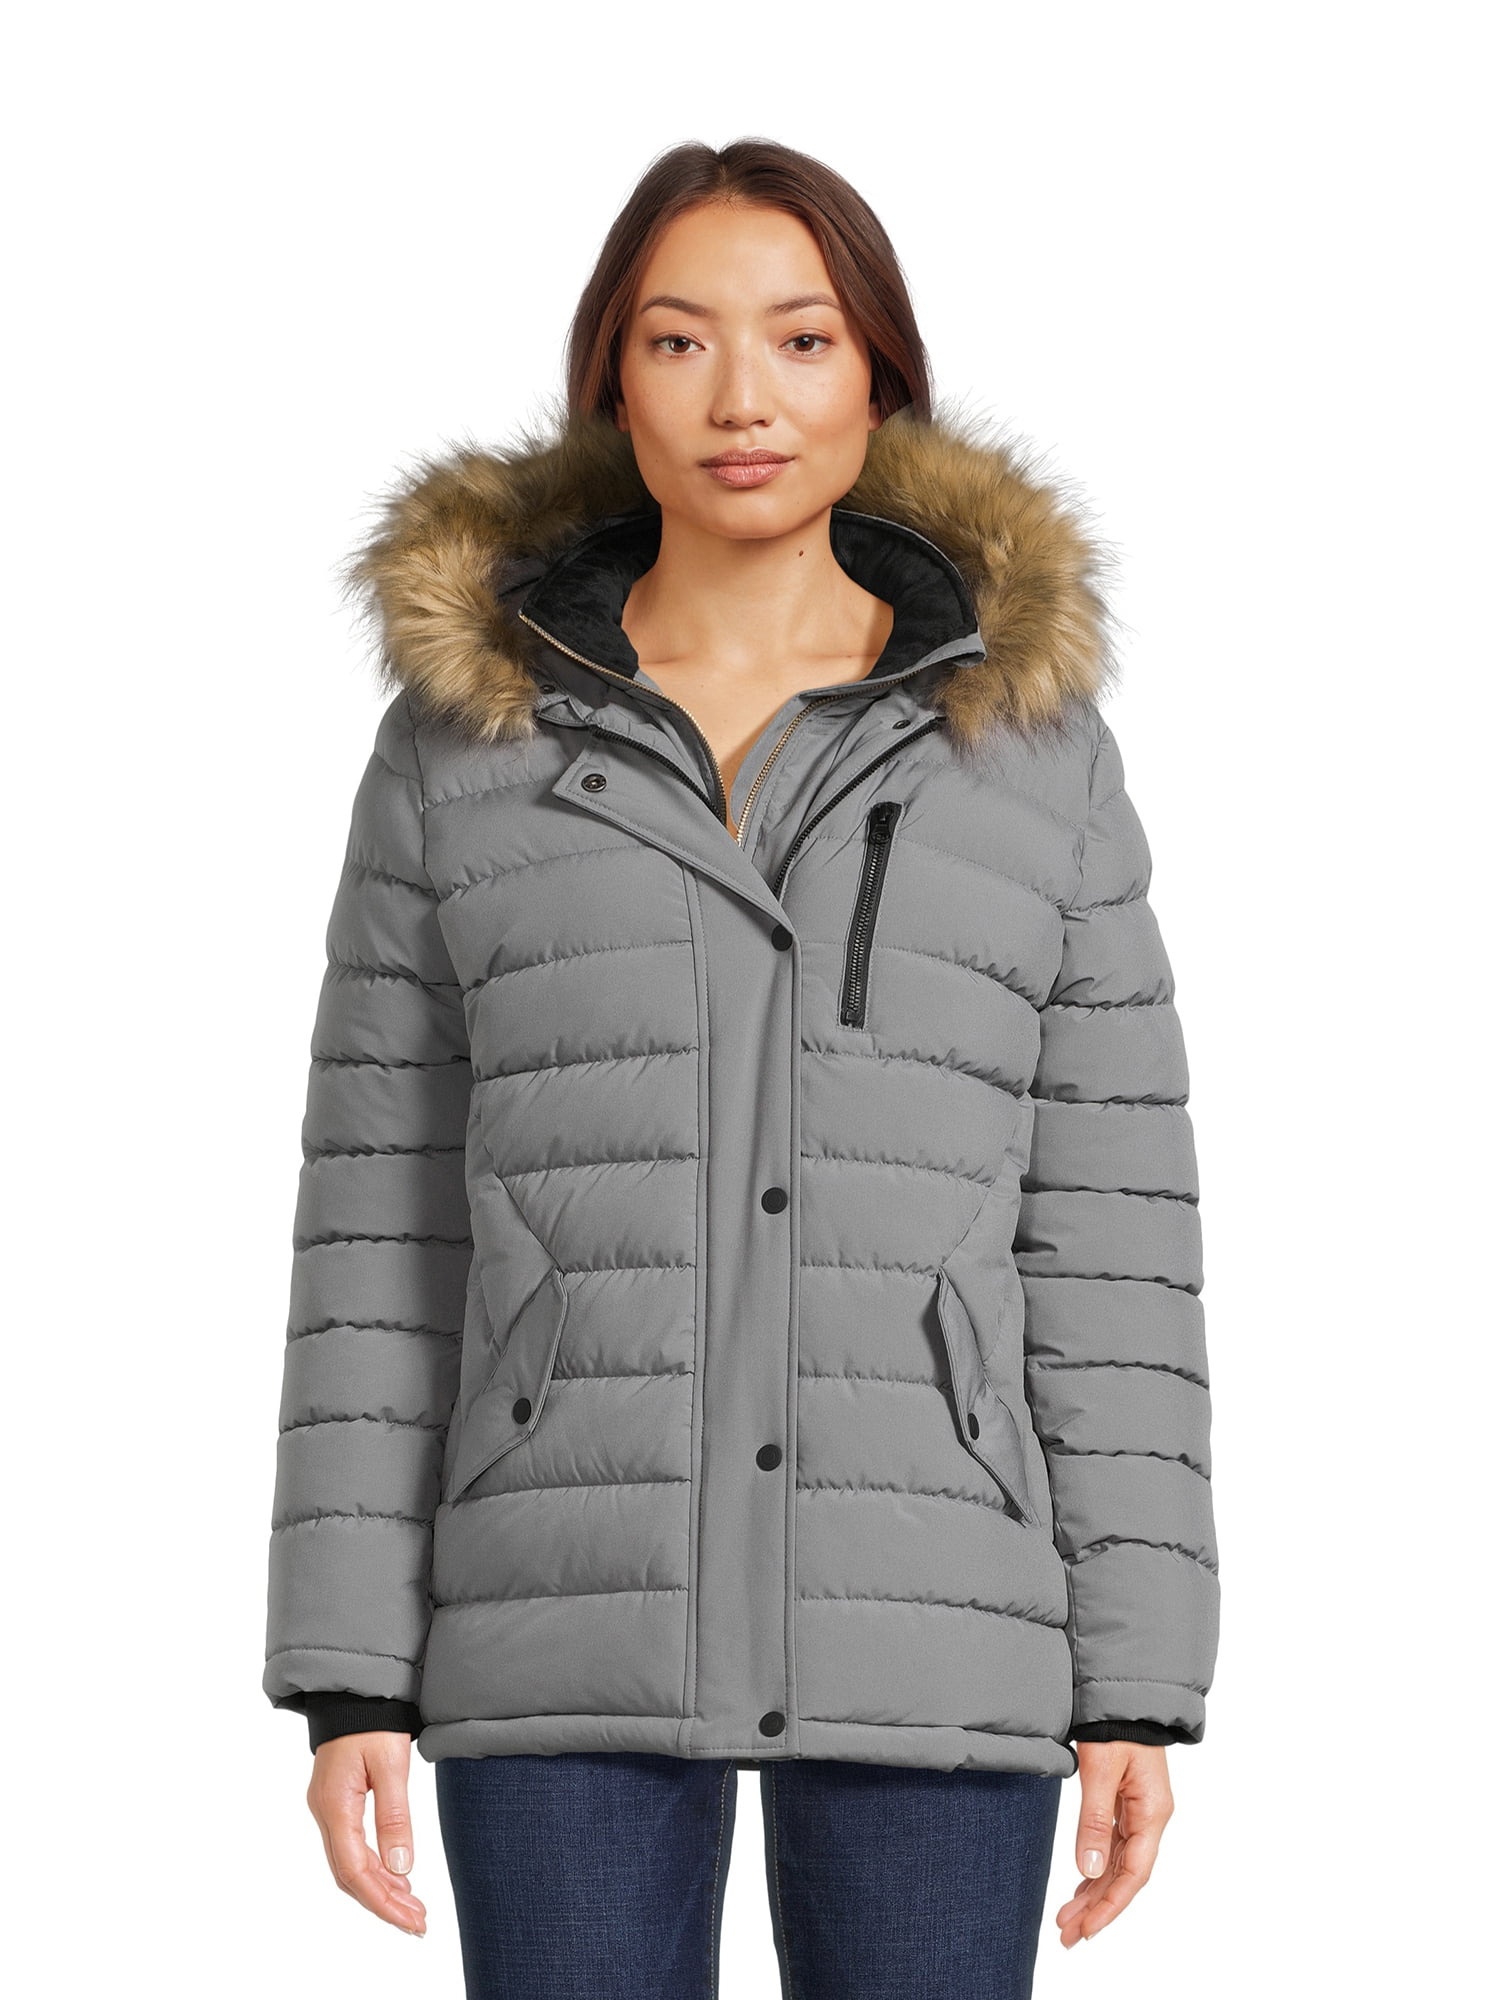 Swiss Tech Women's and Women’s Plus Bibbed Solarball Puffer Coat with ...